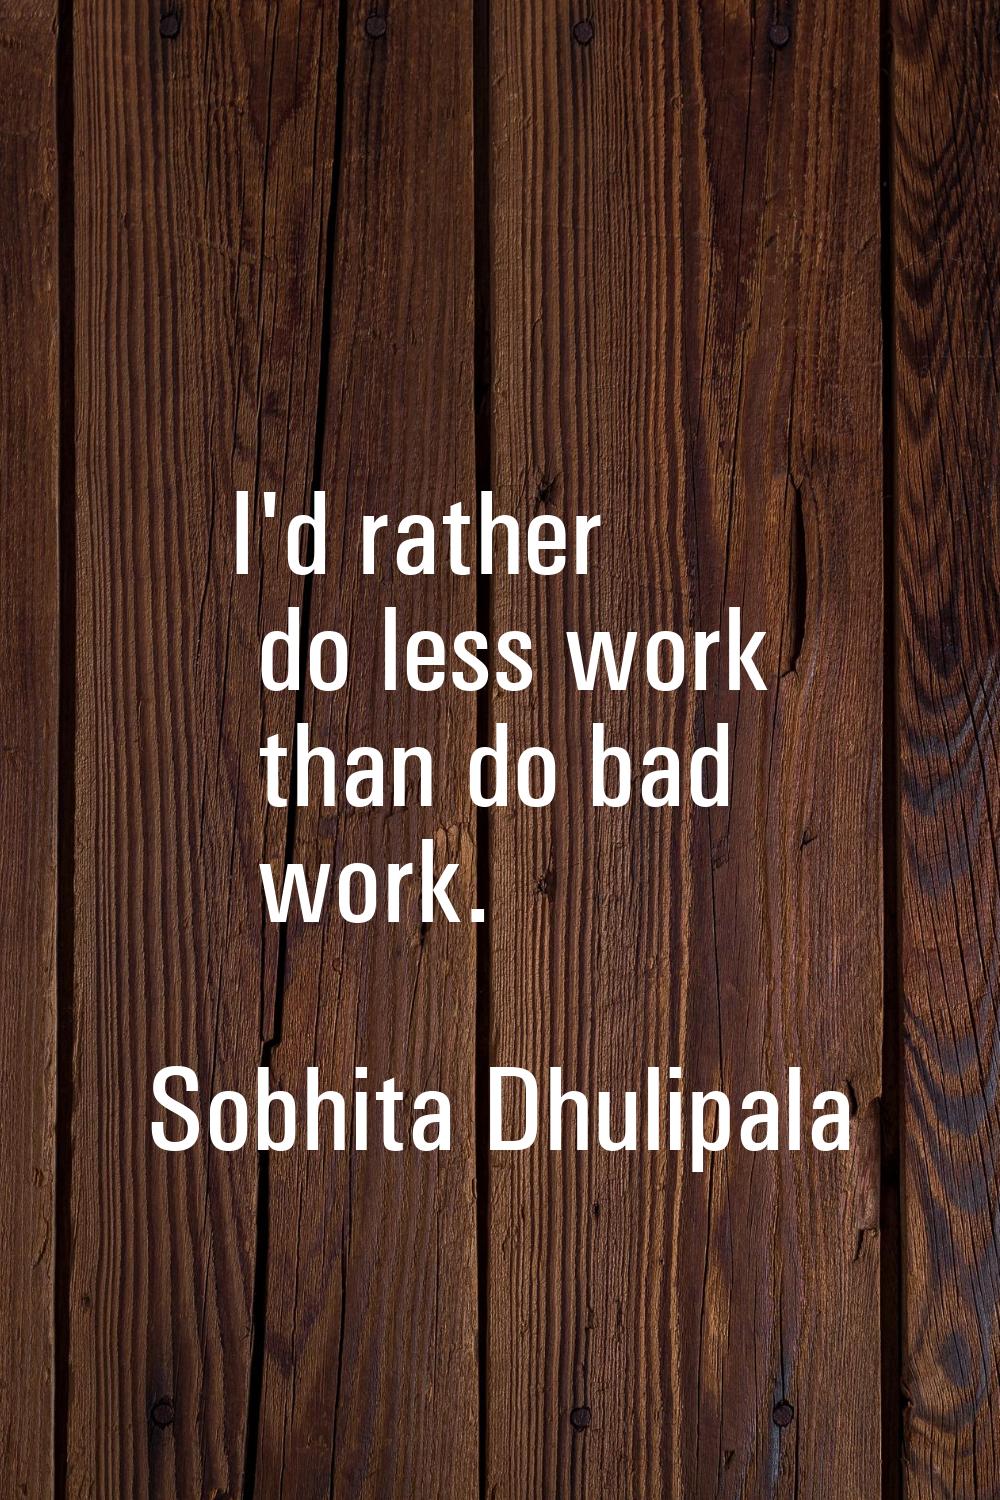 I'd rather do less work than do bad work.